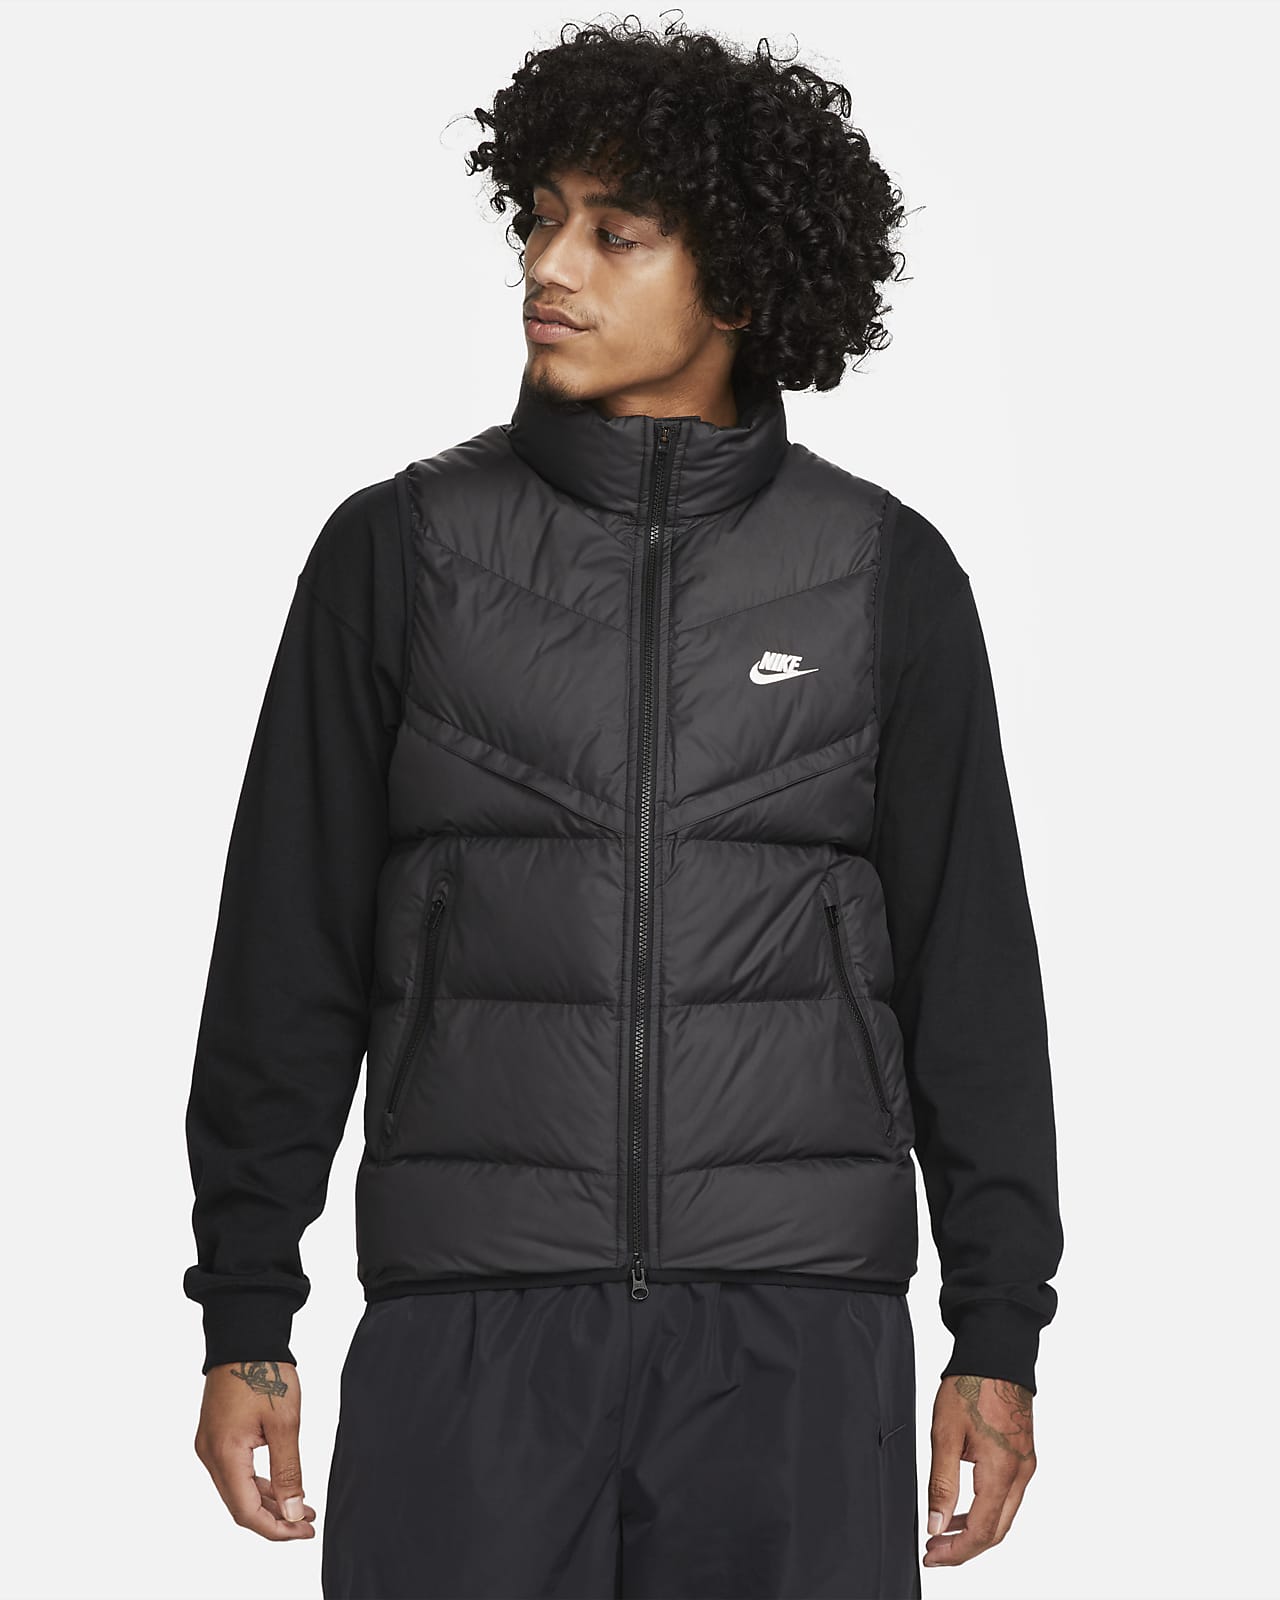 Veste sans manches isolante Nike Storm-FIT Windrunner pour homme. Nike BE